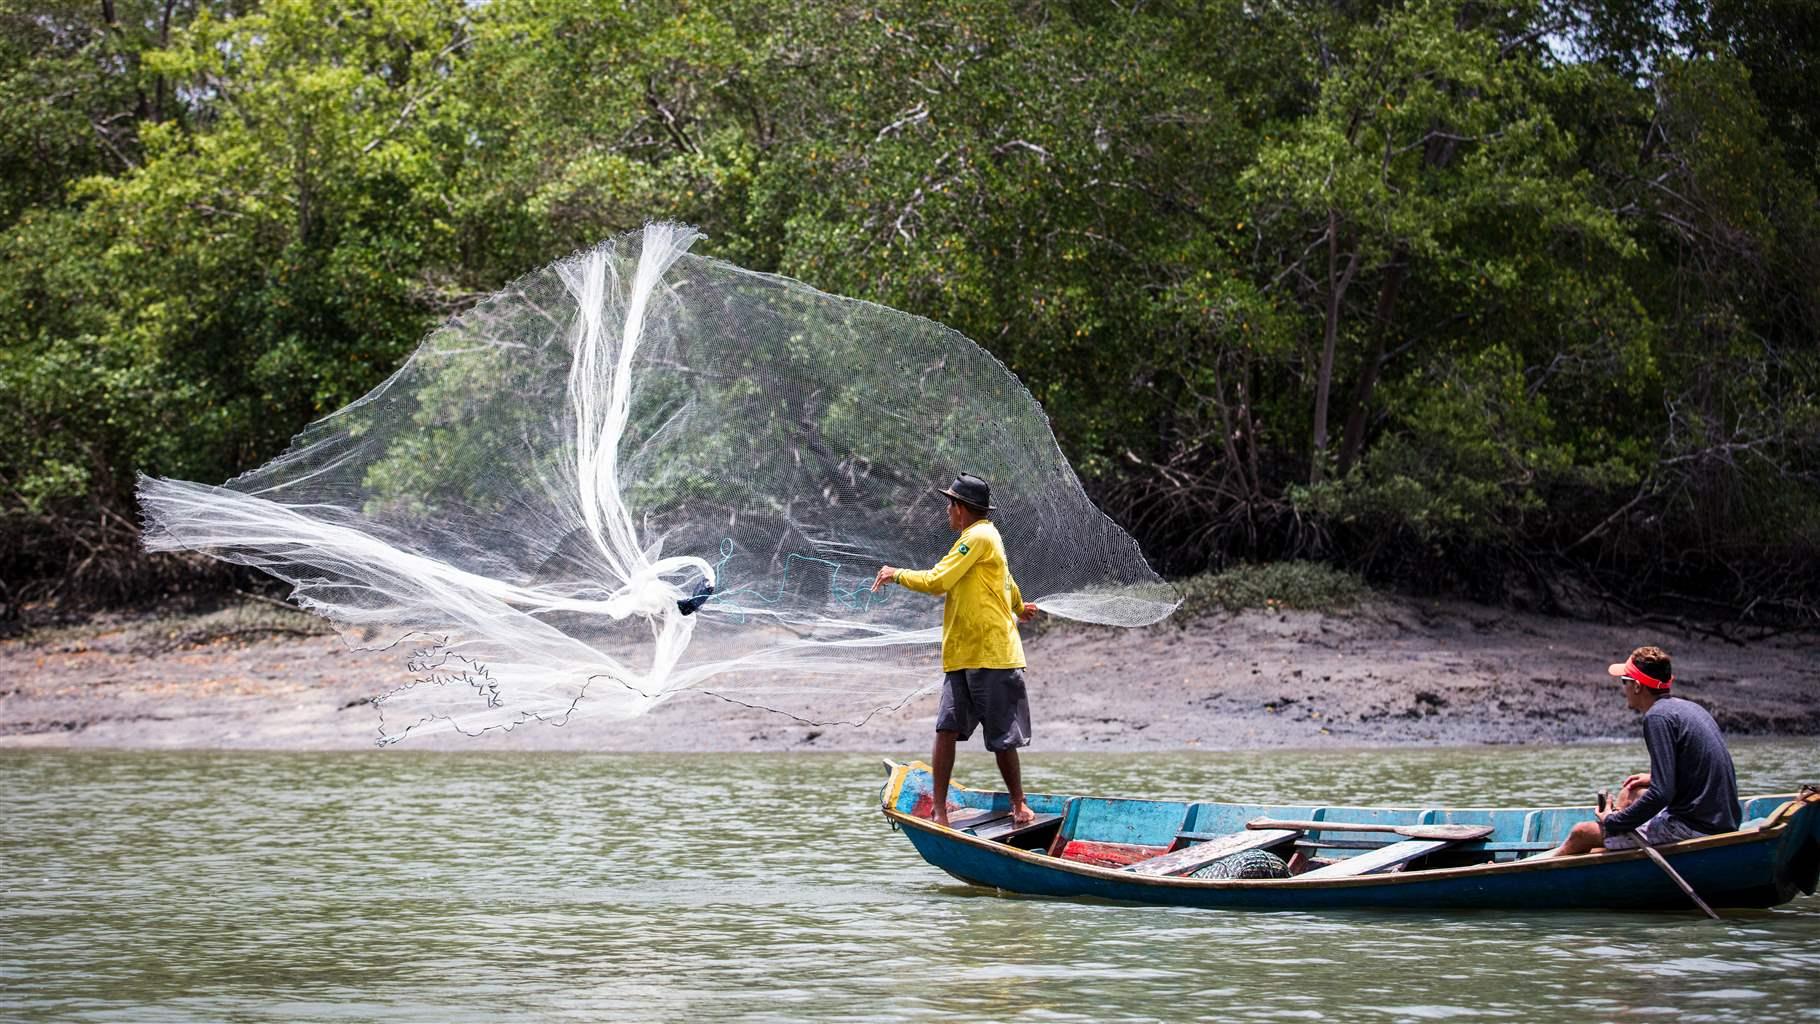 A man in shorts and a yellow shirt standing in a canoe throws a fishing net into the water while another man sits at the other end of the canoe. Onshore in the near background is a dense stand of trees.